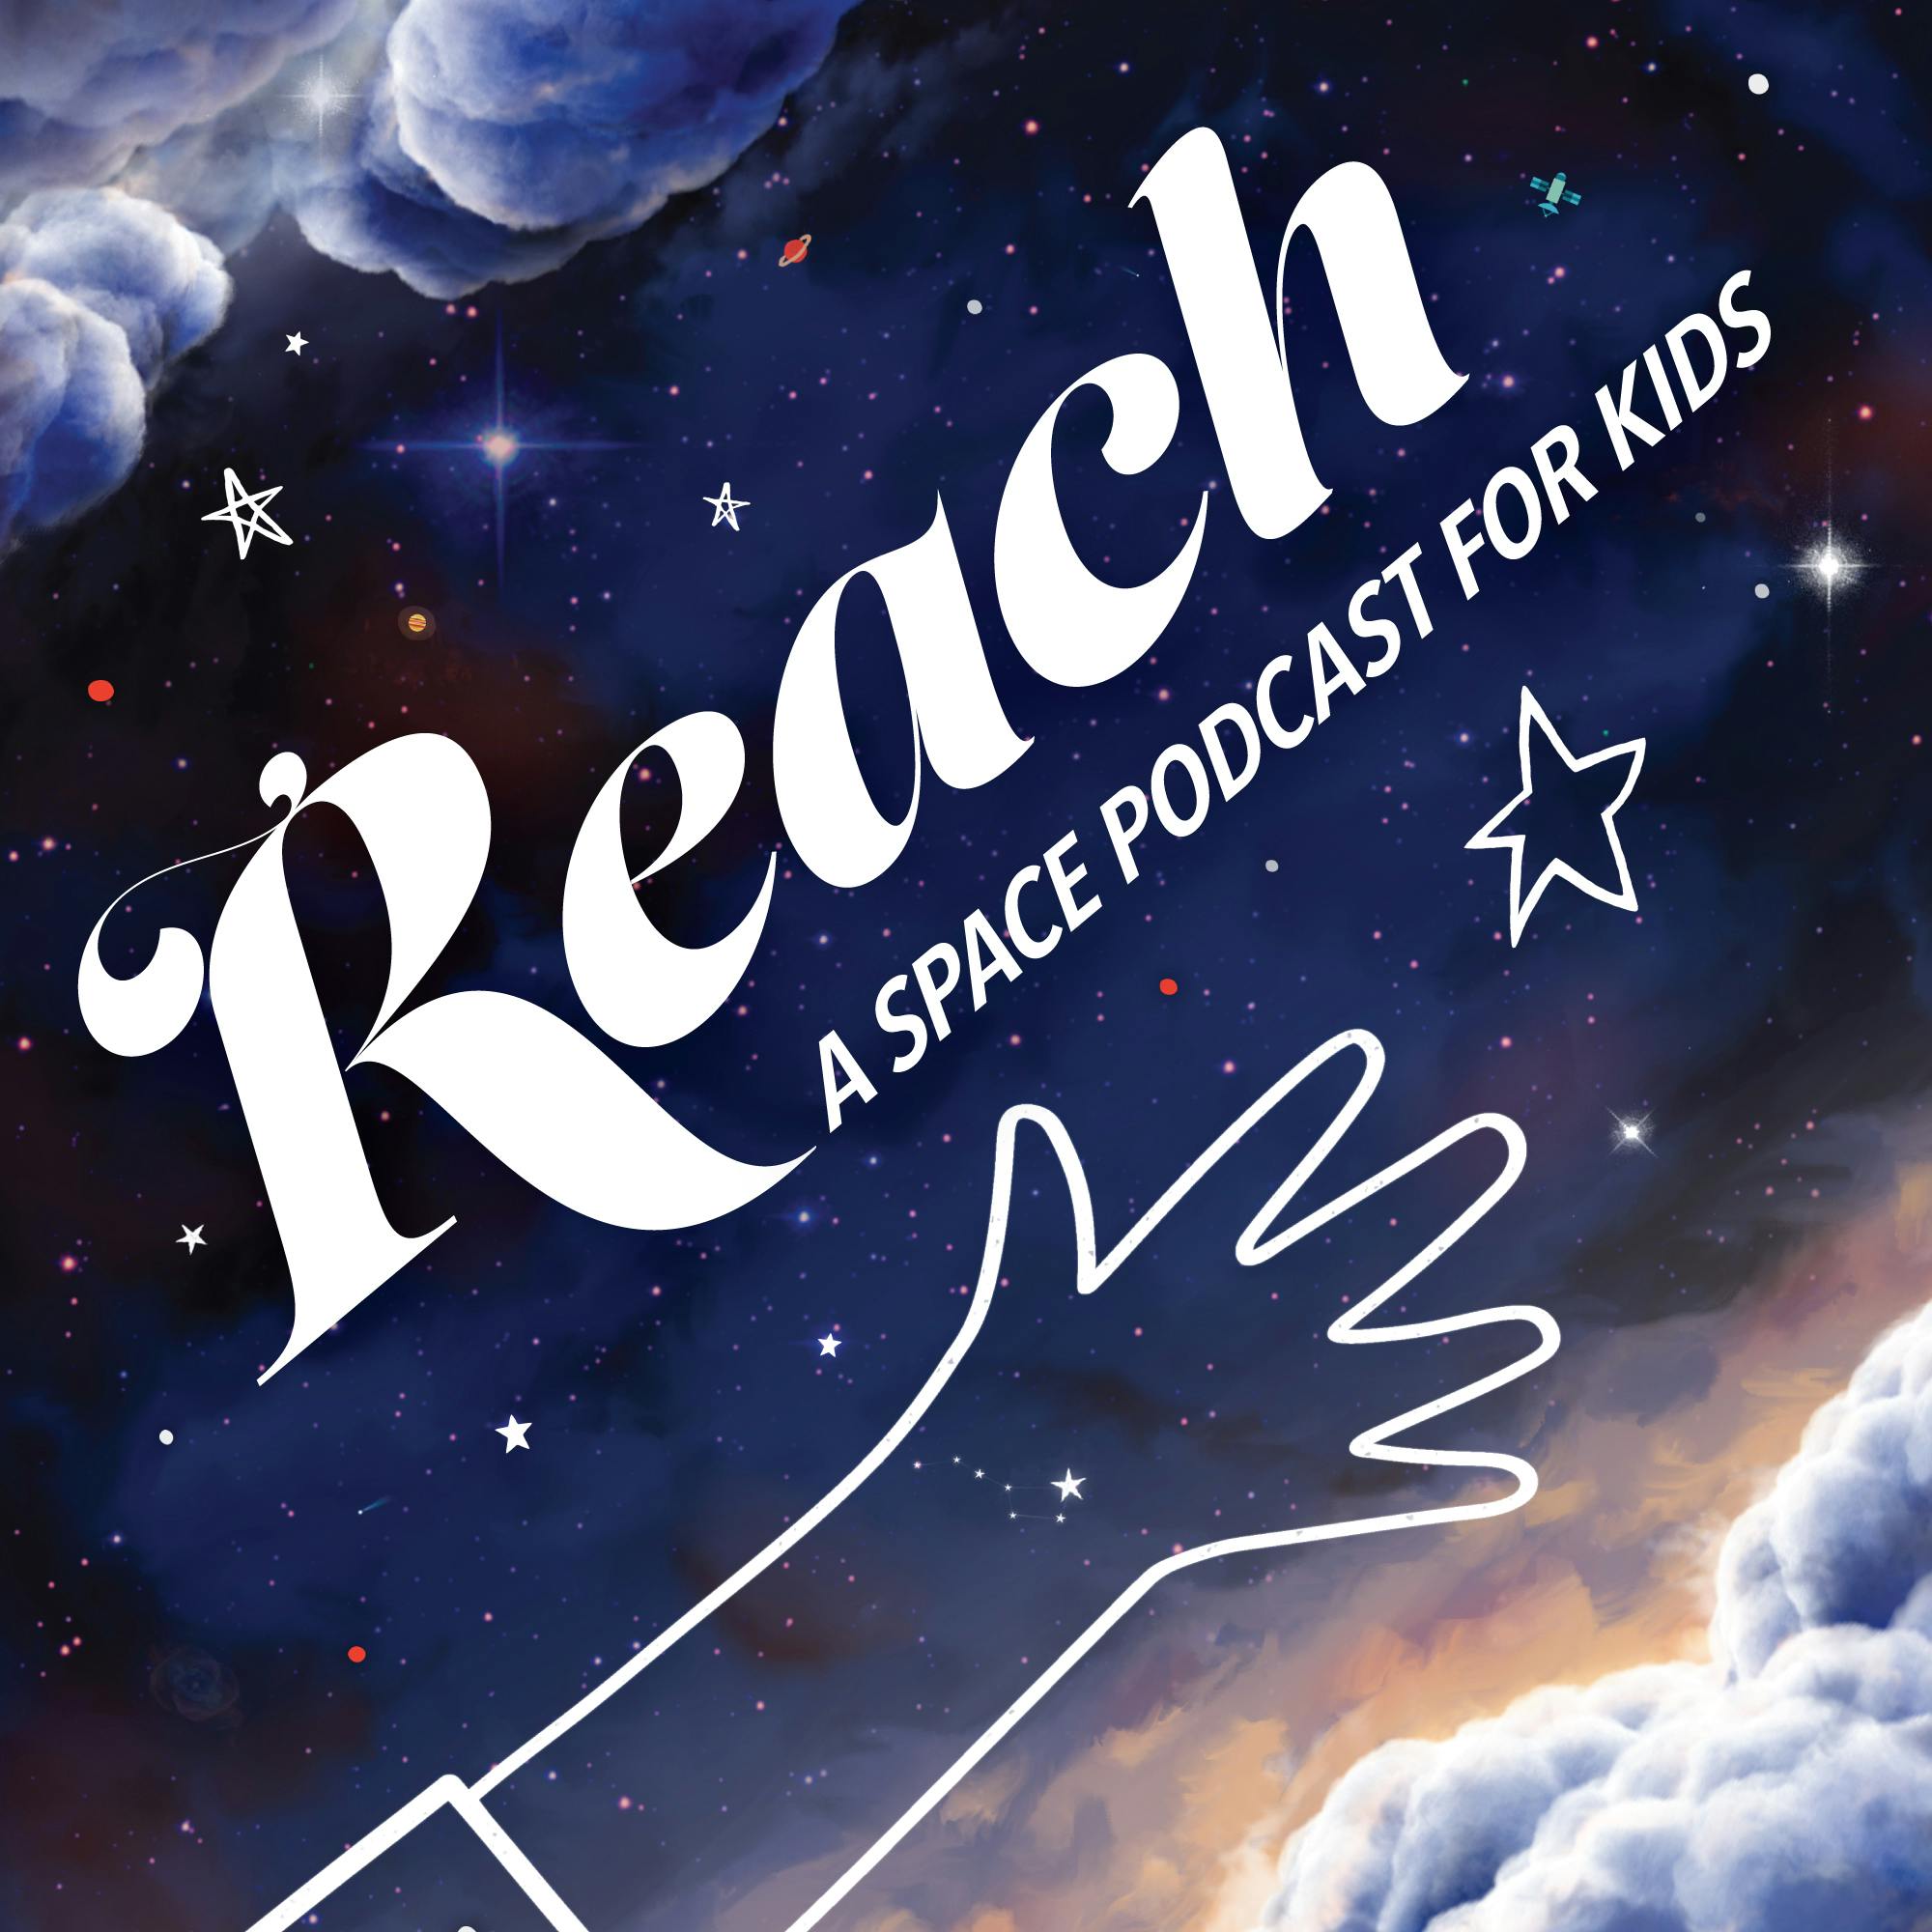 Introducing...REACH: First Canadian to Walk in Space with Col. Chris Hadfield and Kevin Vida